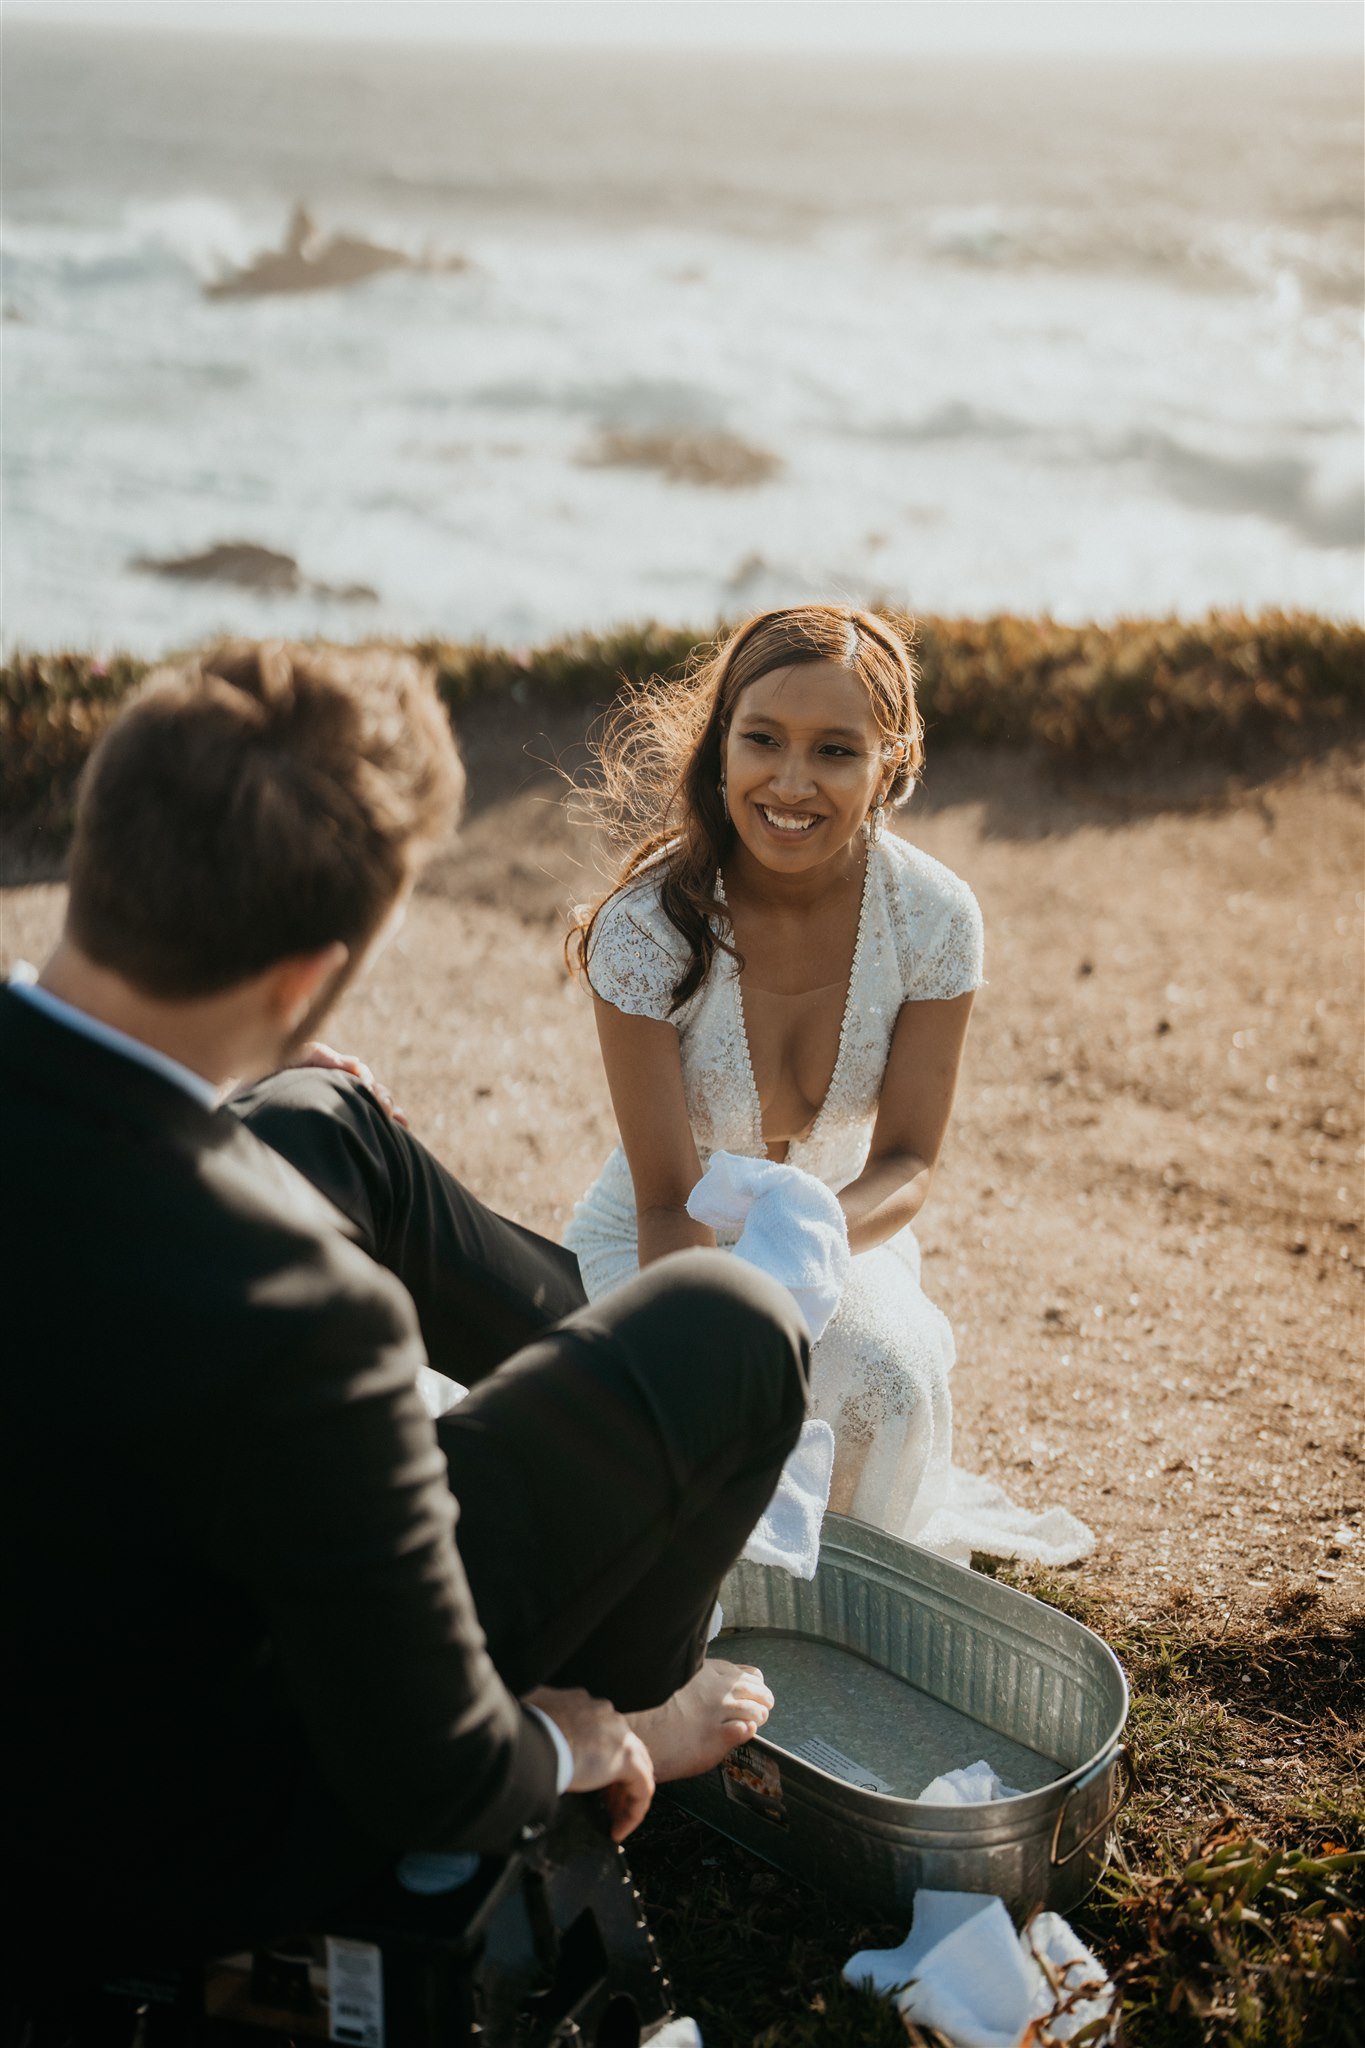 Bride washes groom's feet during wedding ceremony at Big Sur